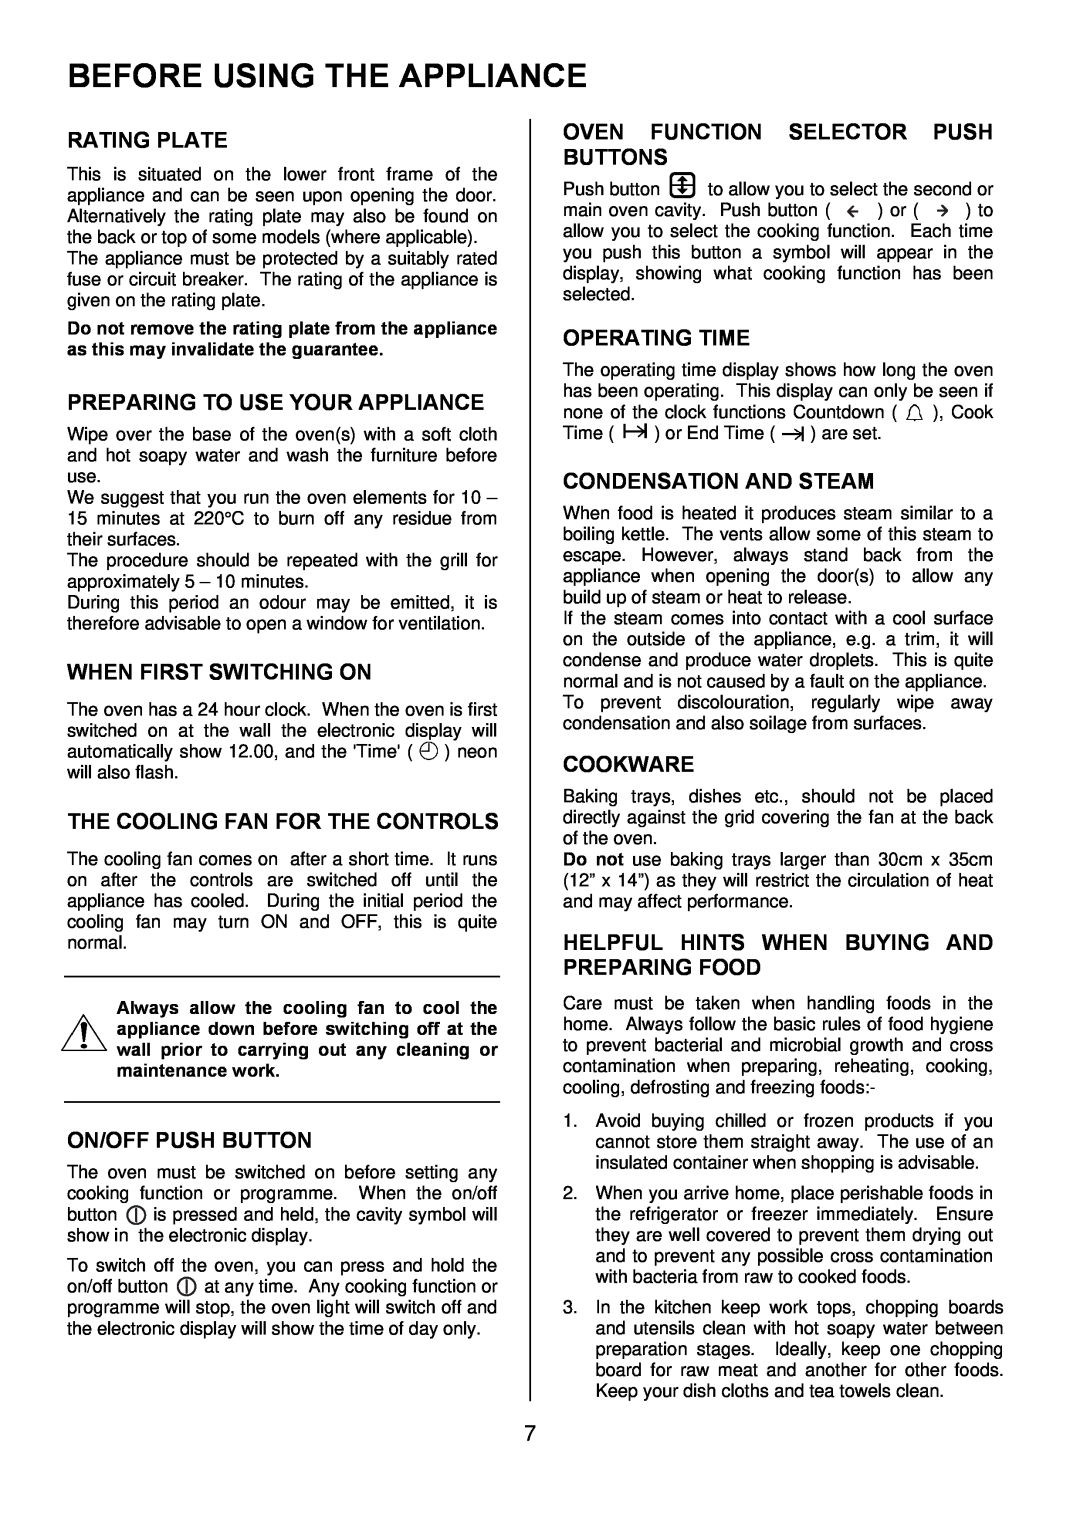 Zanussi ZOD 685 manual Before Using The Appliance, Rating Plate, Preparing To Use Your Appliance, When First Switching On 